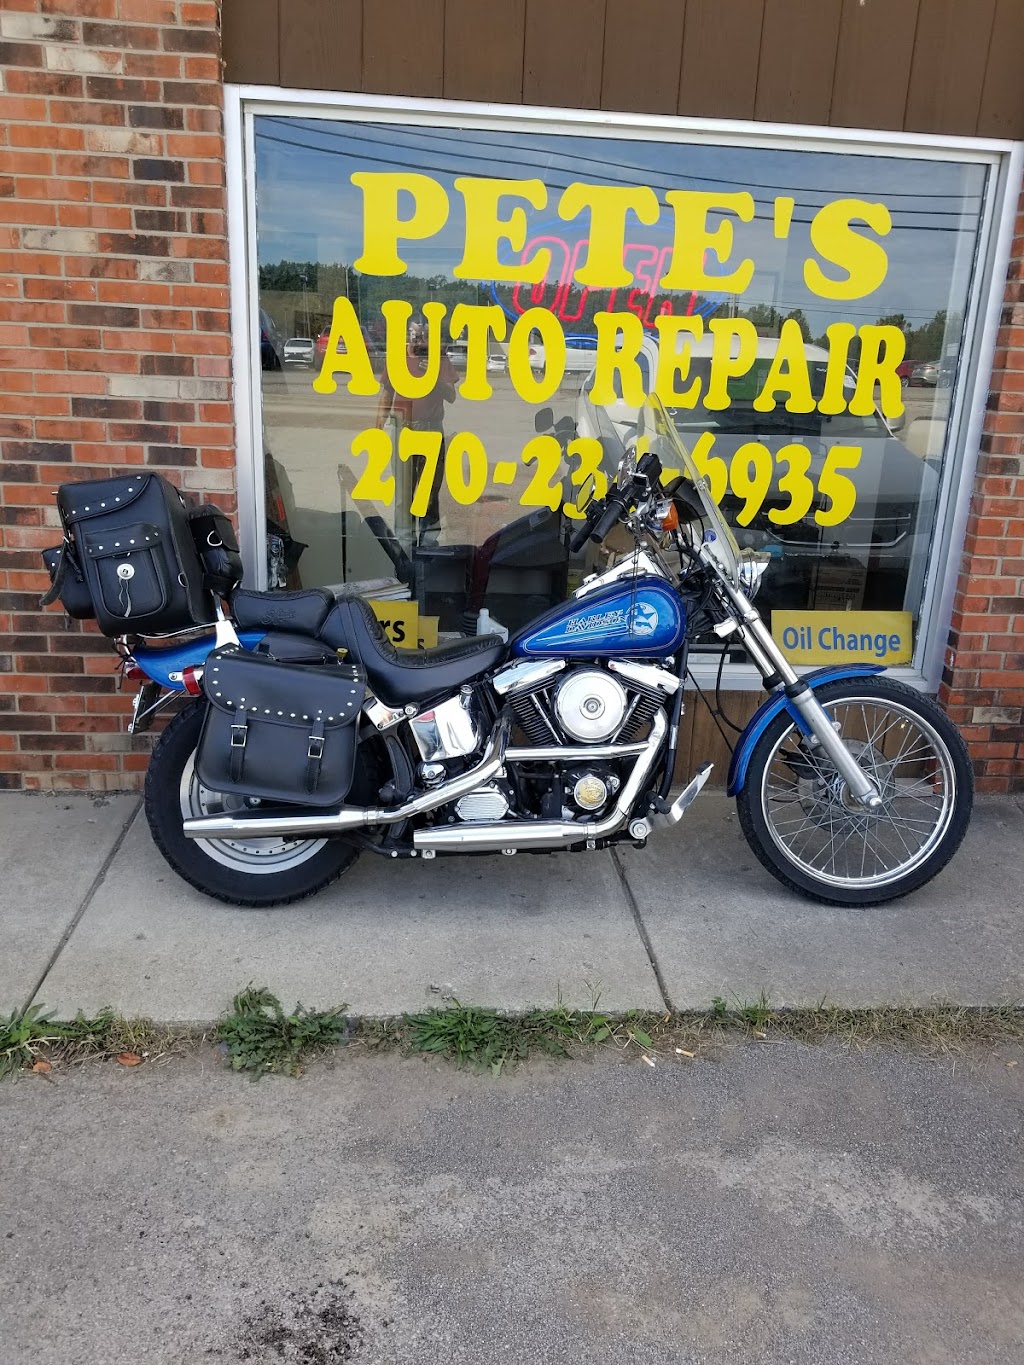 Petes Auto Repair | 287 South Wilson Road #341 Moving to, be behind, 287 S Wilson Rd #341, Radcliff, KY 40160, USA | Phone: (270) 234-6935